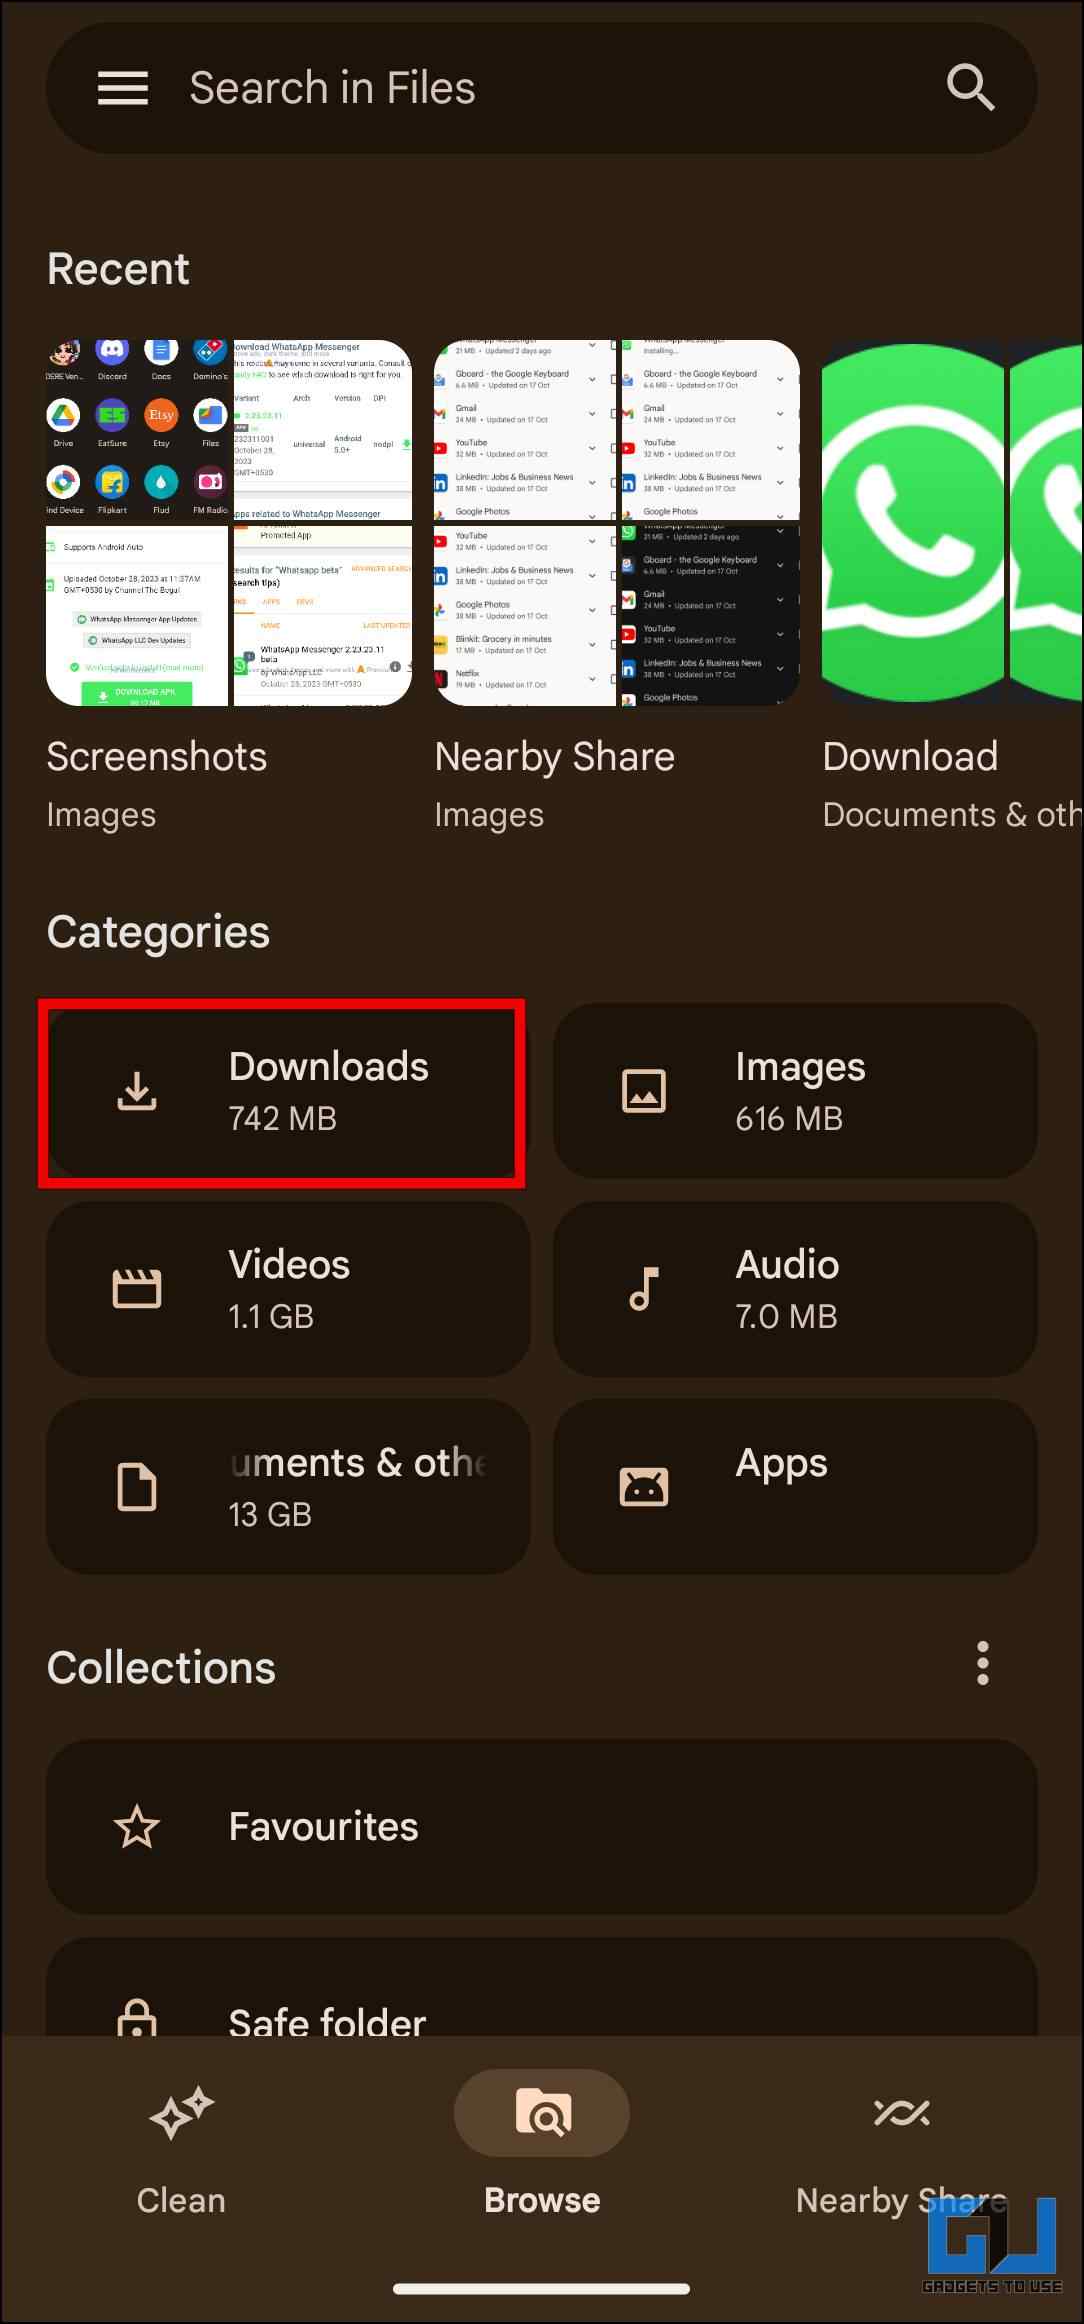 Go to the Downloads Folder in File Manager